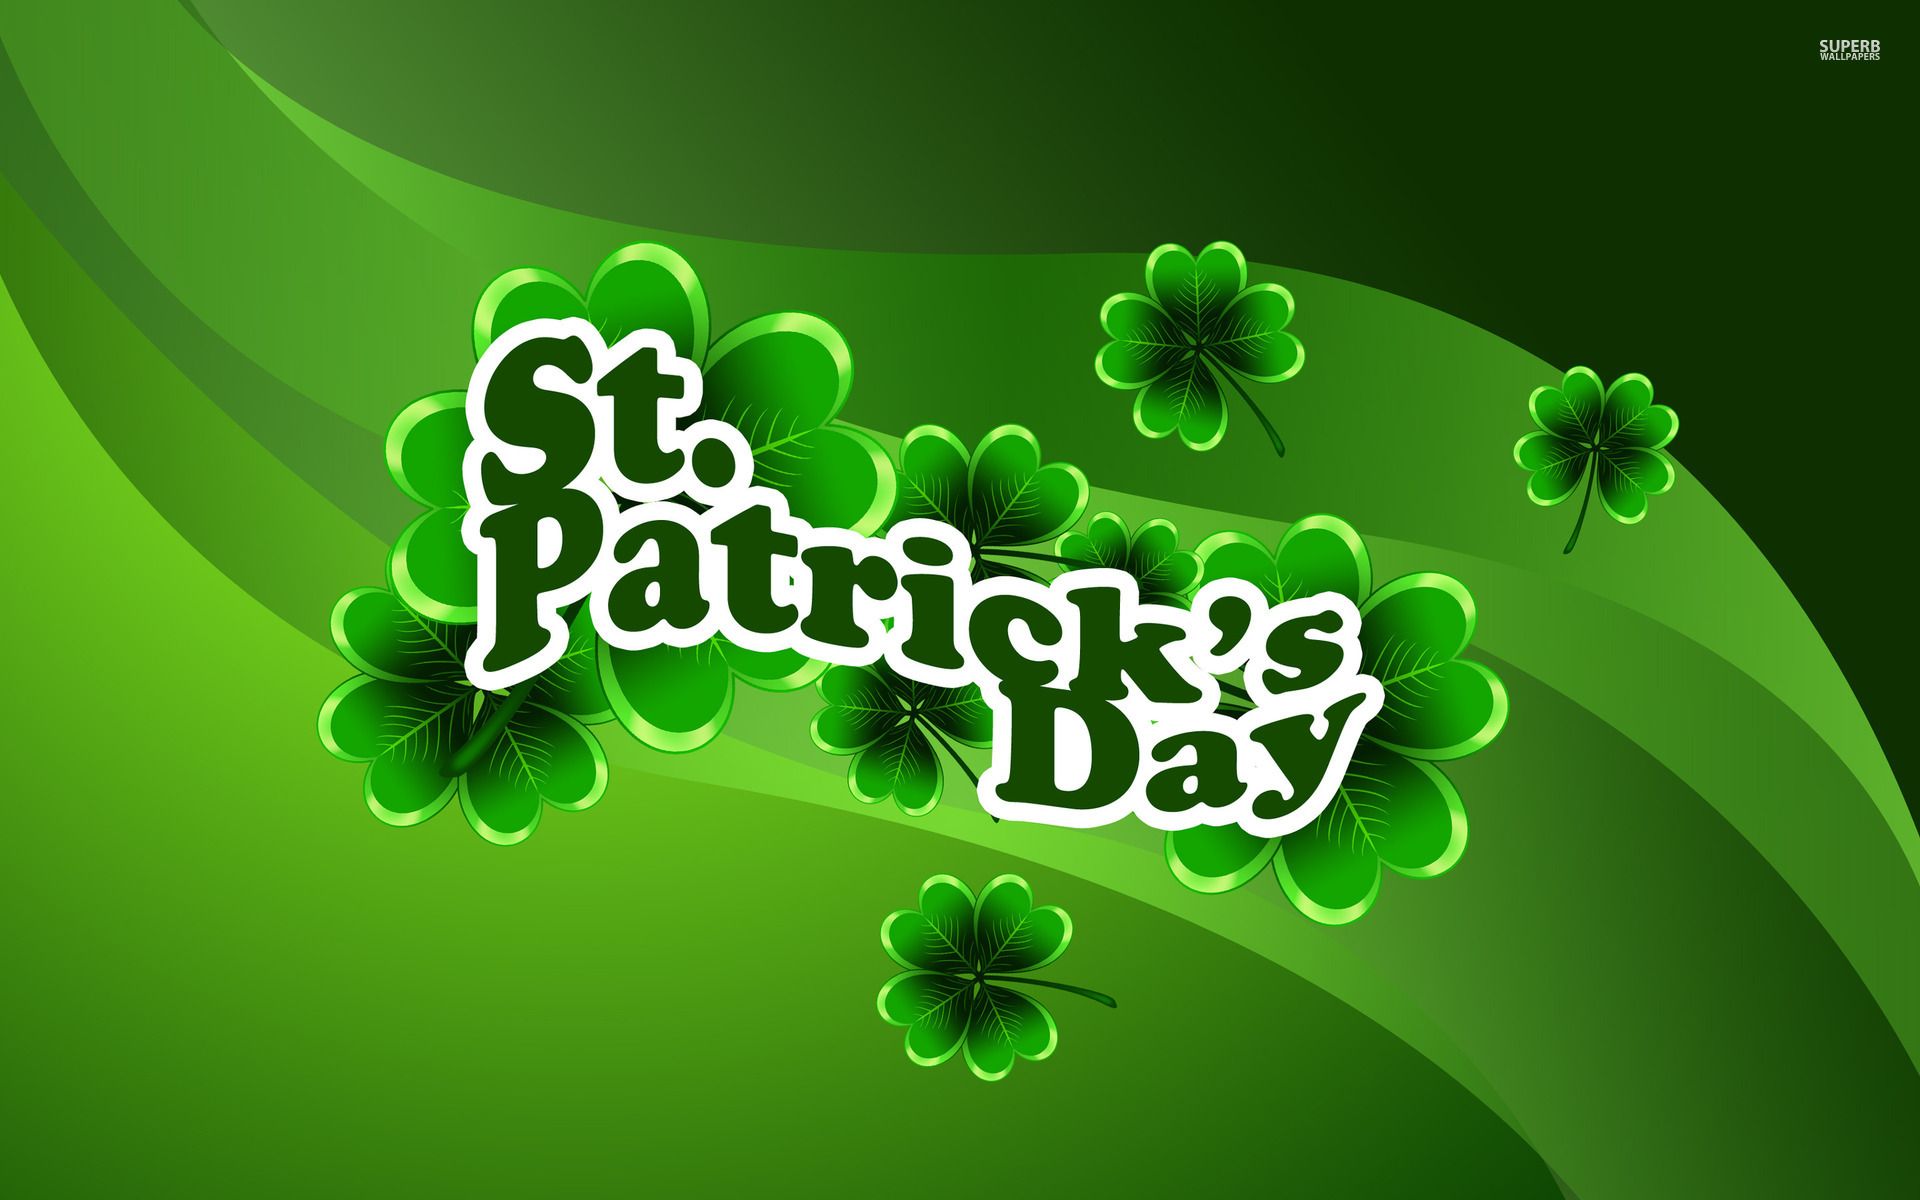 St. Patrick's Day wallpaper, Holiday, HQ St. Patrick's Day